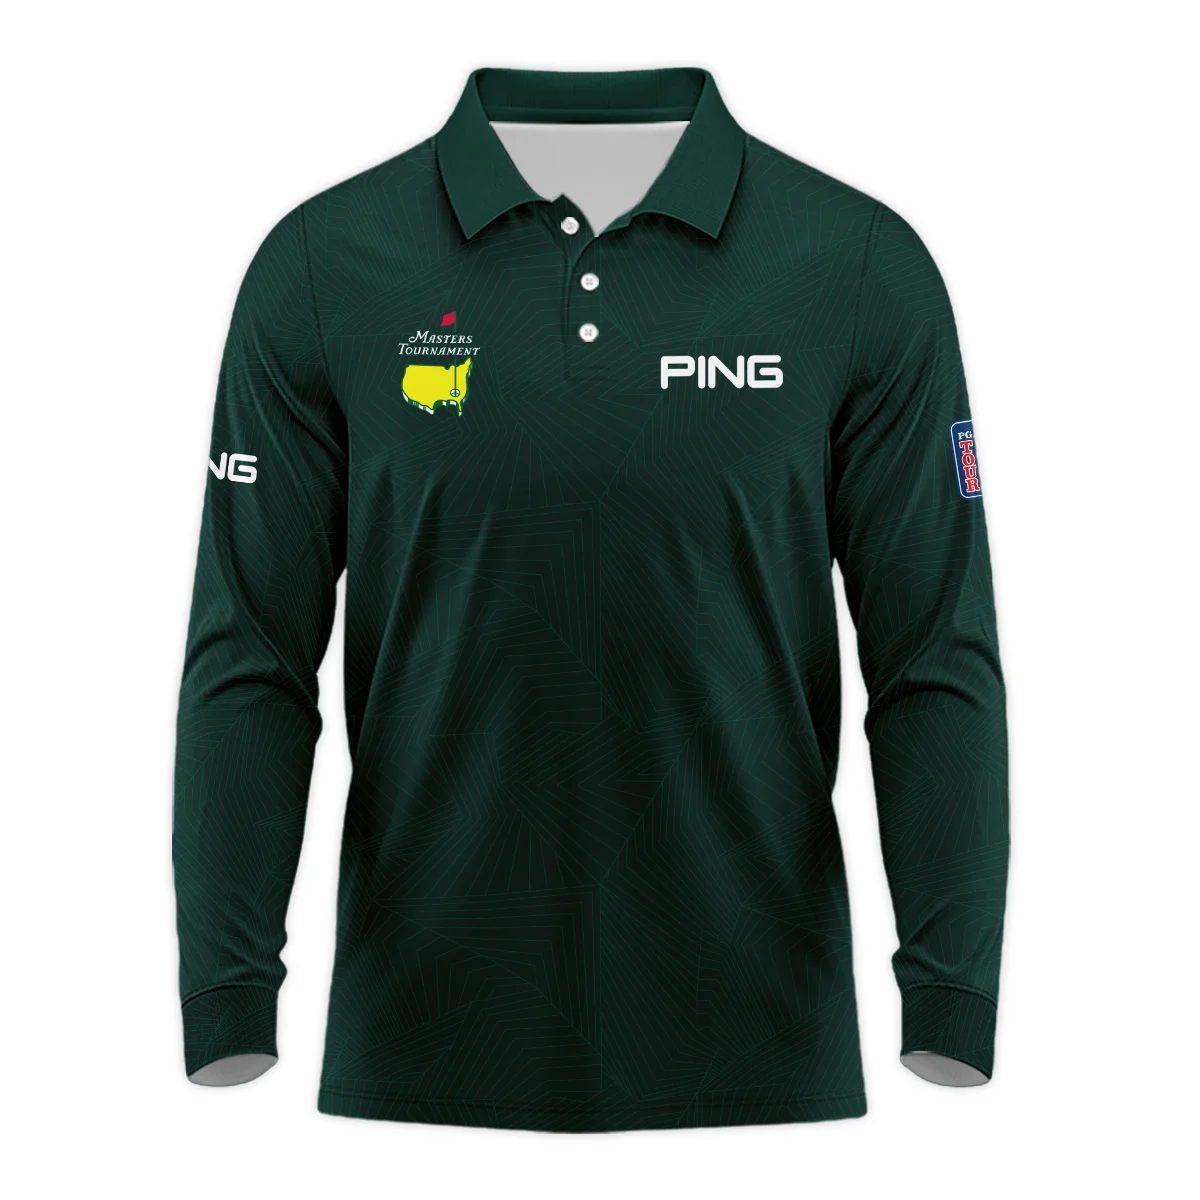 Masters Tournament Ping Pattern Sport Jersey Dark Green Vneck Polo Shirt Style Classic Polo Shirt For Men